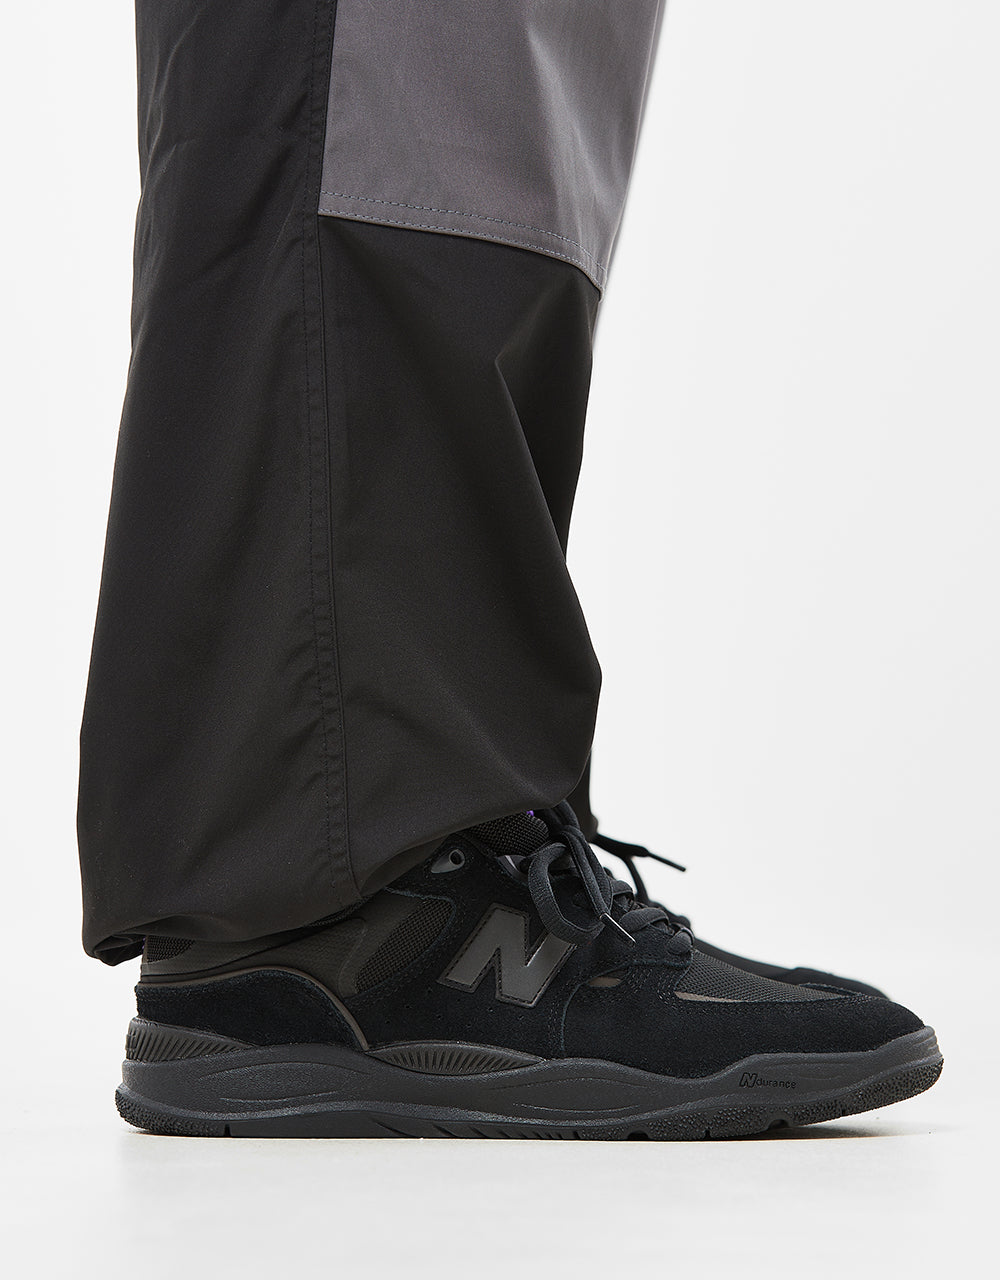 Route One Explorer Pant - Charcoal